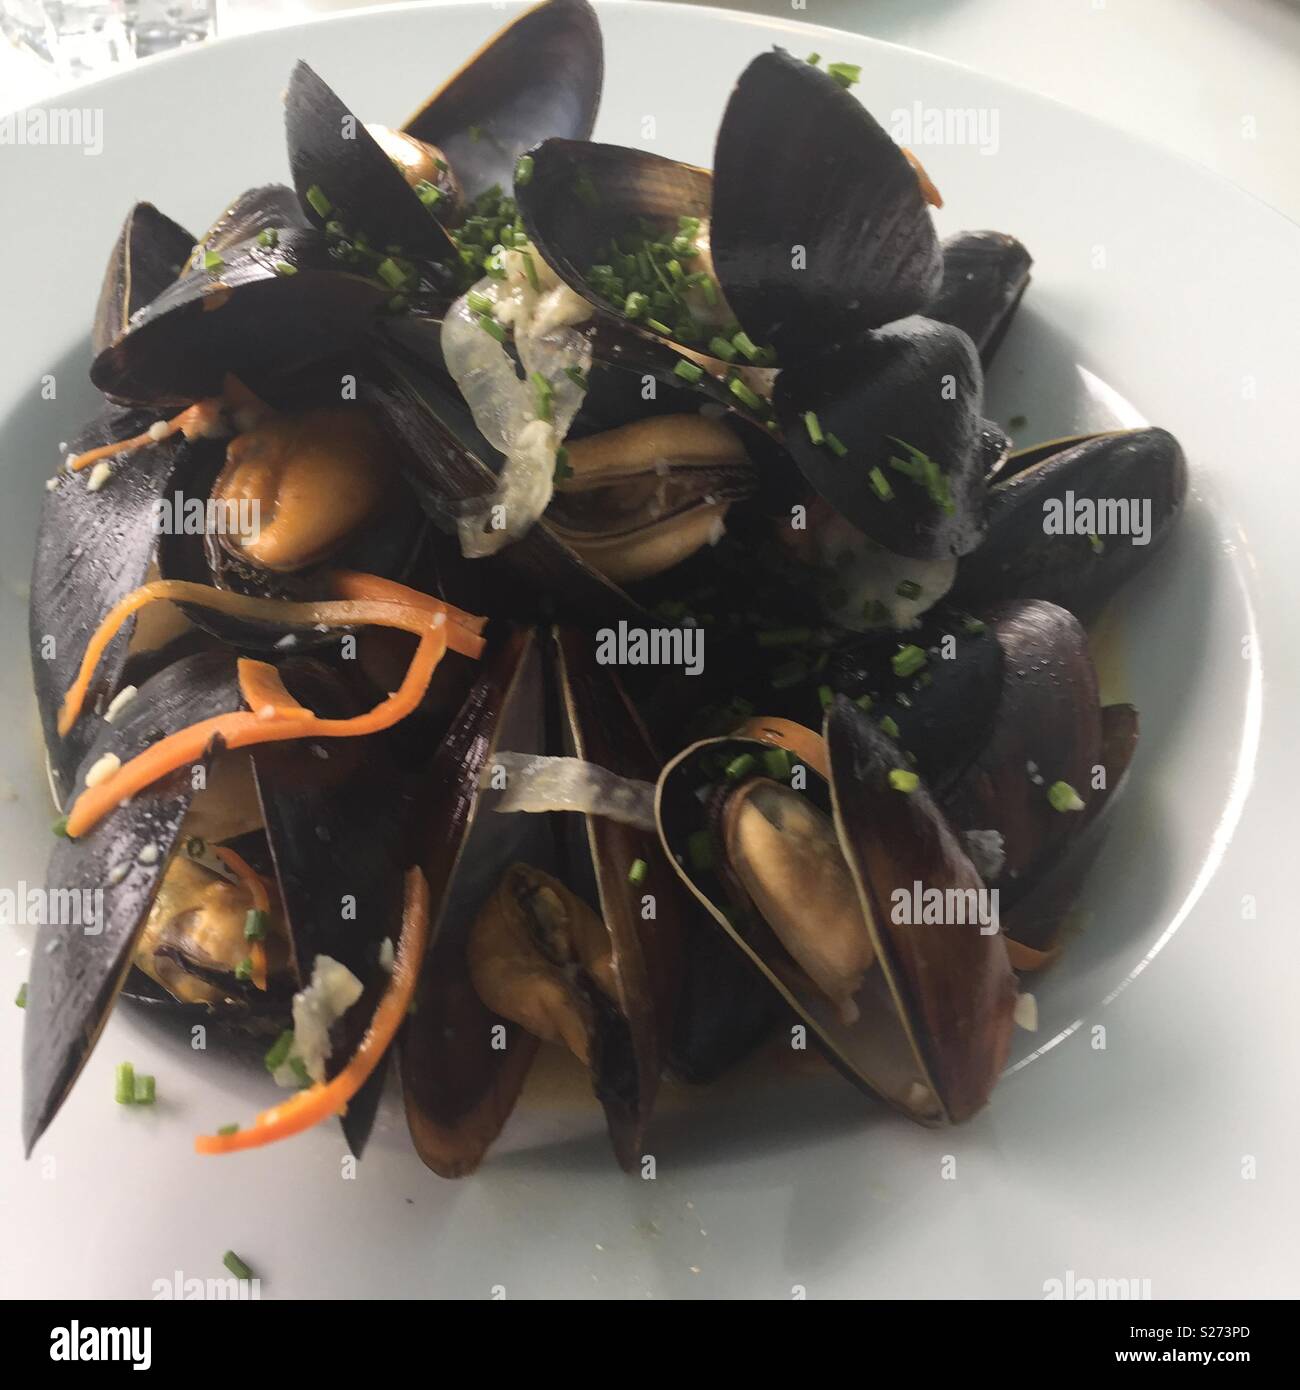 Blue mussels in white wine – yummy! Stock Photo